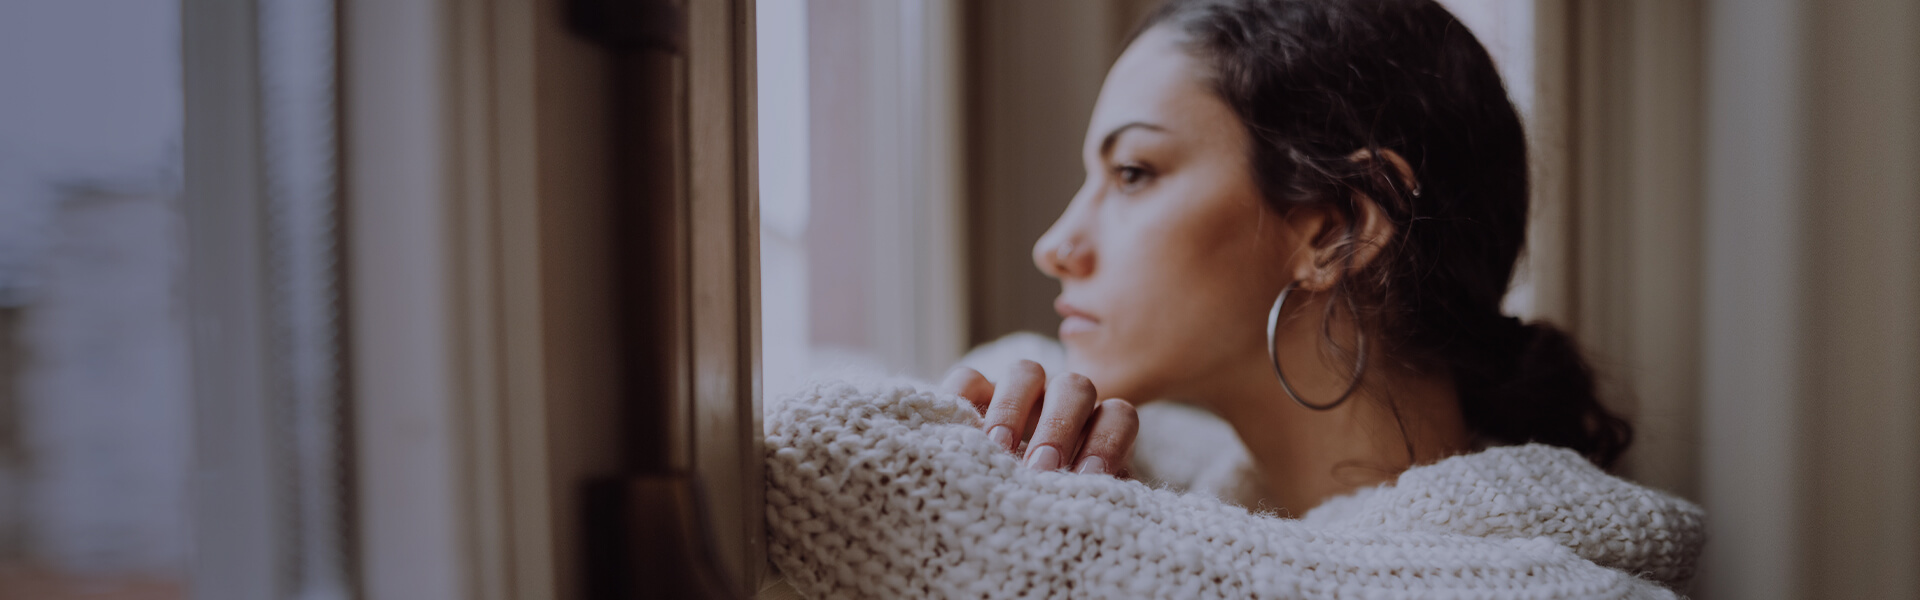 Image of woman looking thoughtfully out window